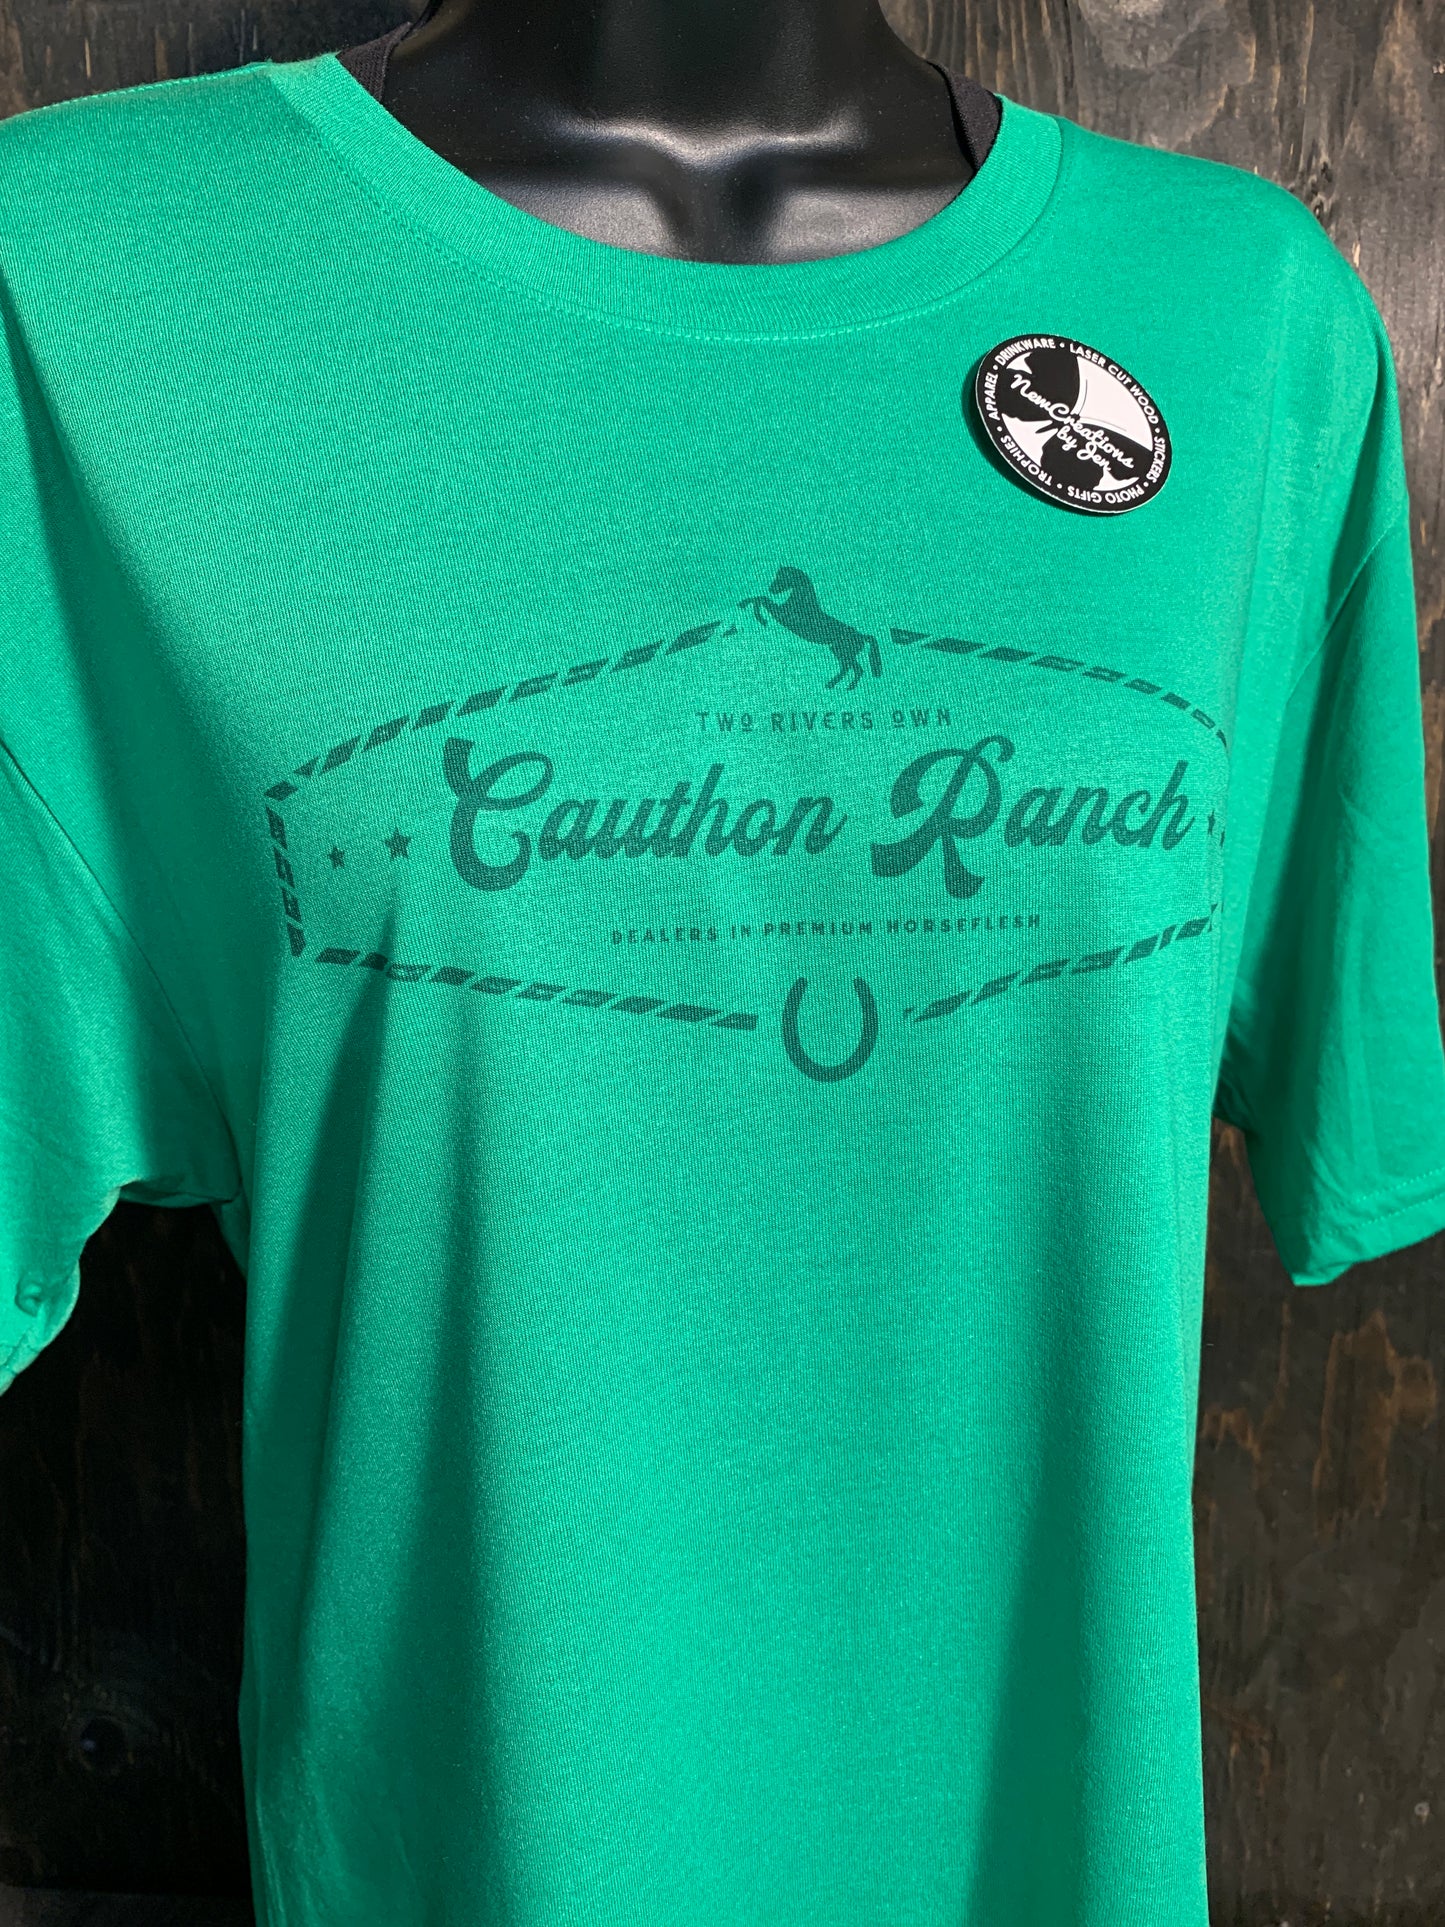 Cauthon Ranch - Wheel of Time Inspired  Souvenir Lightweight  Tees